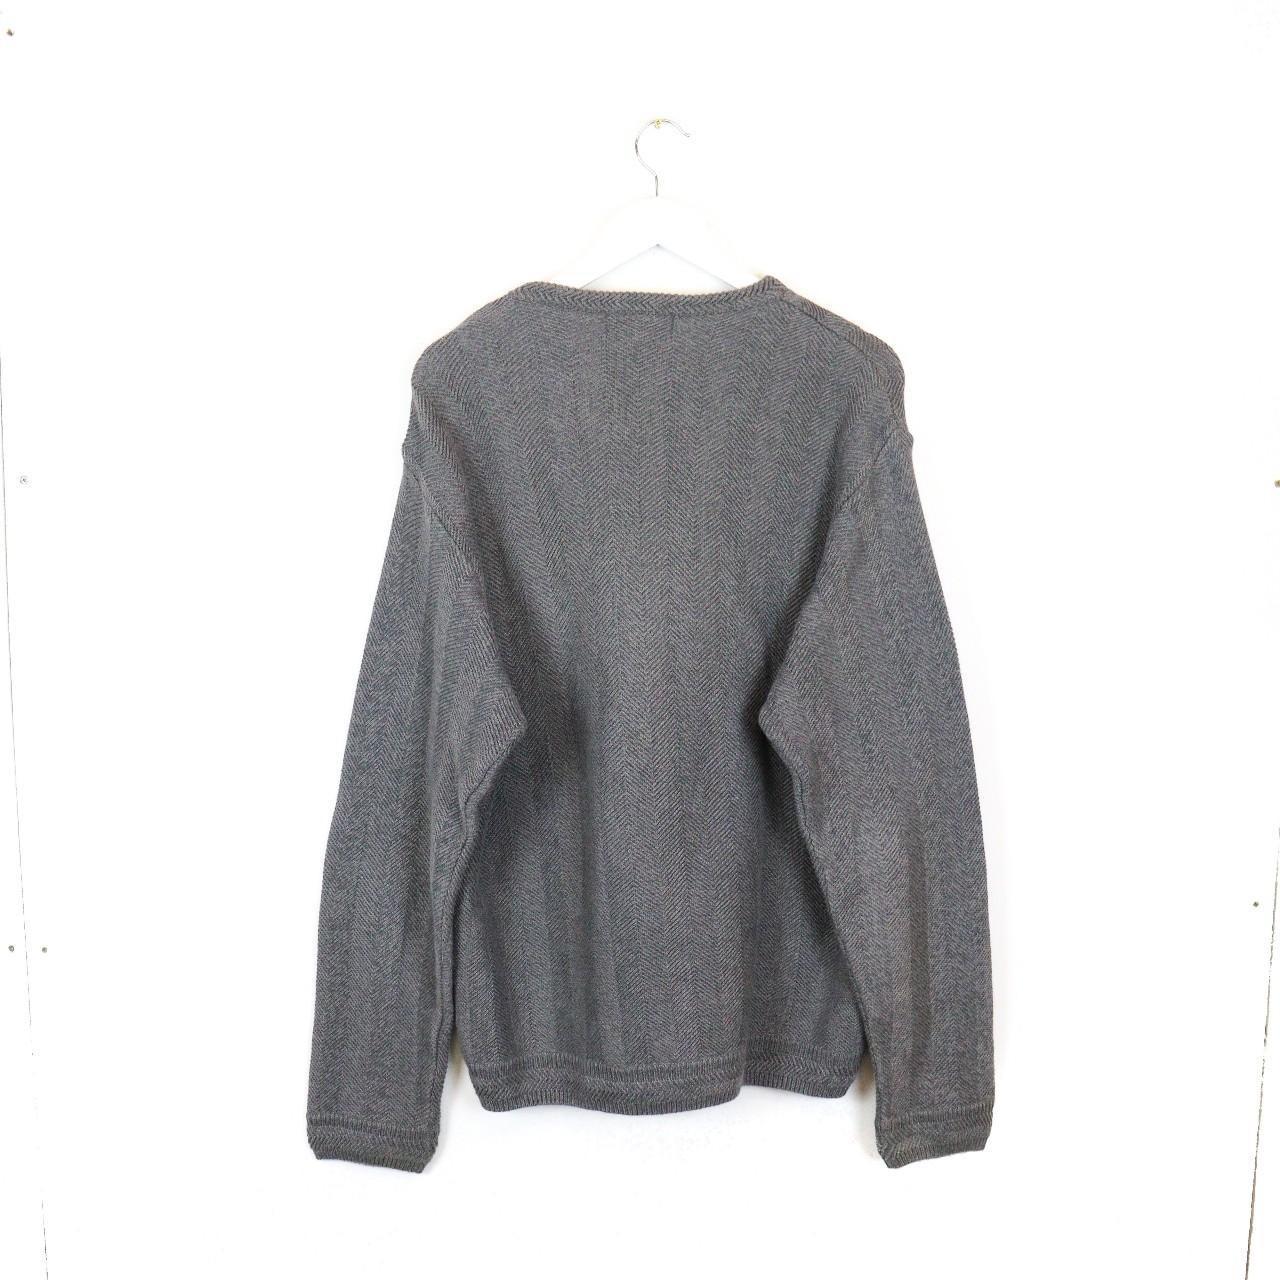 KNITTED GREY CHAPS JUMPER - (XL) Chaps by Ralph... - Depop